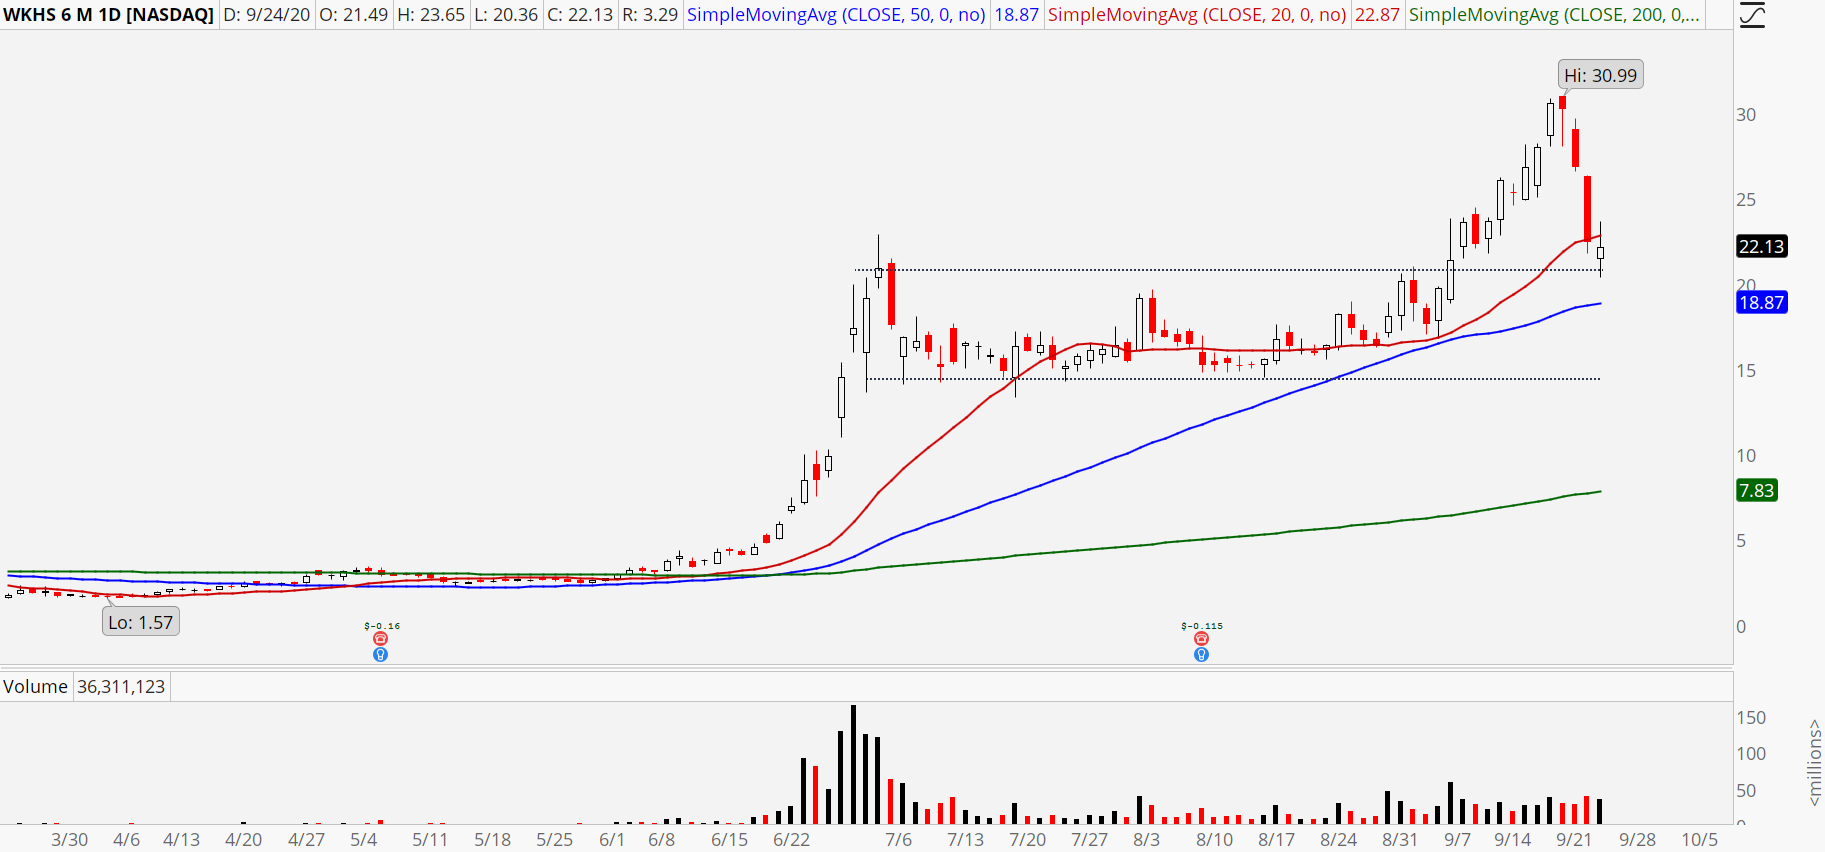 Workhorse (WKHS) stock that shows a bull retracement pattern